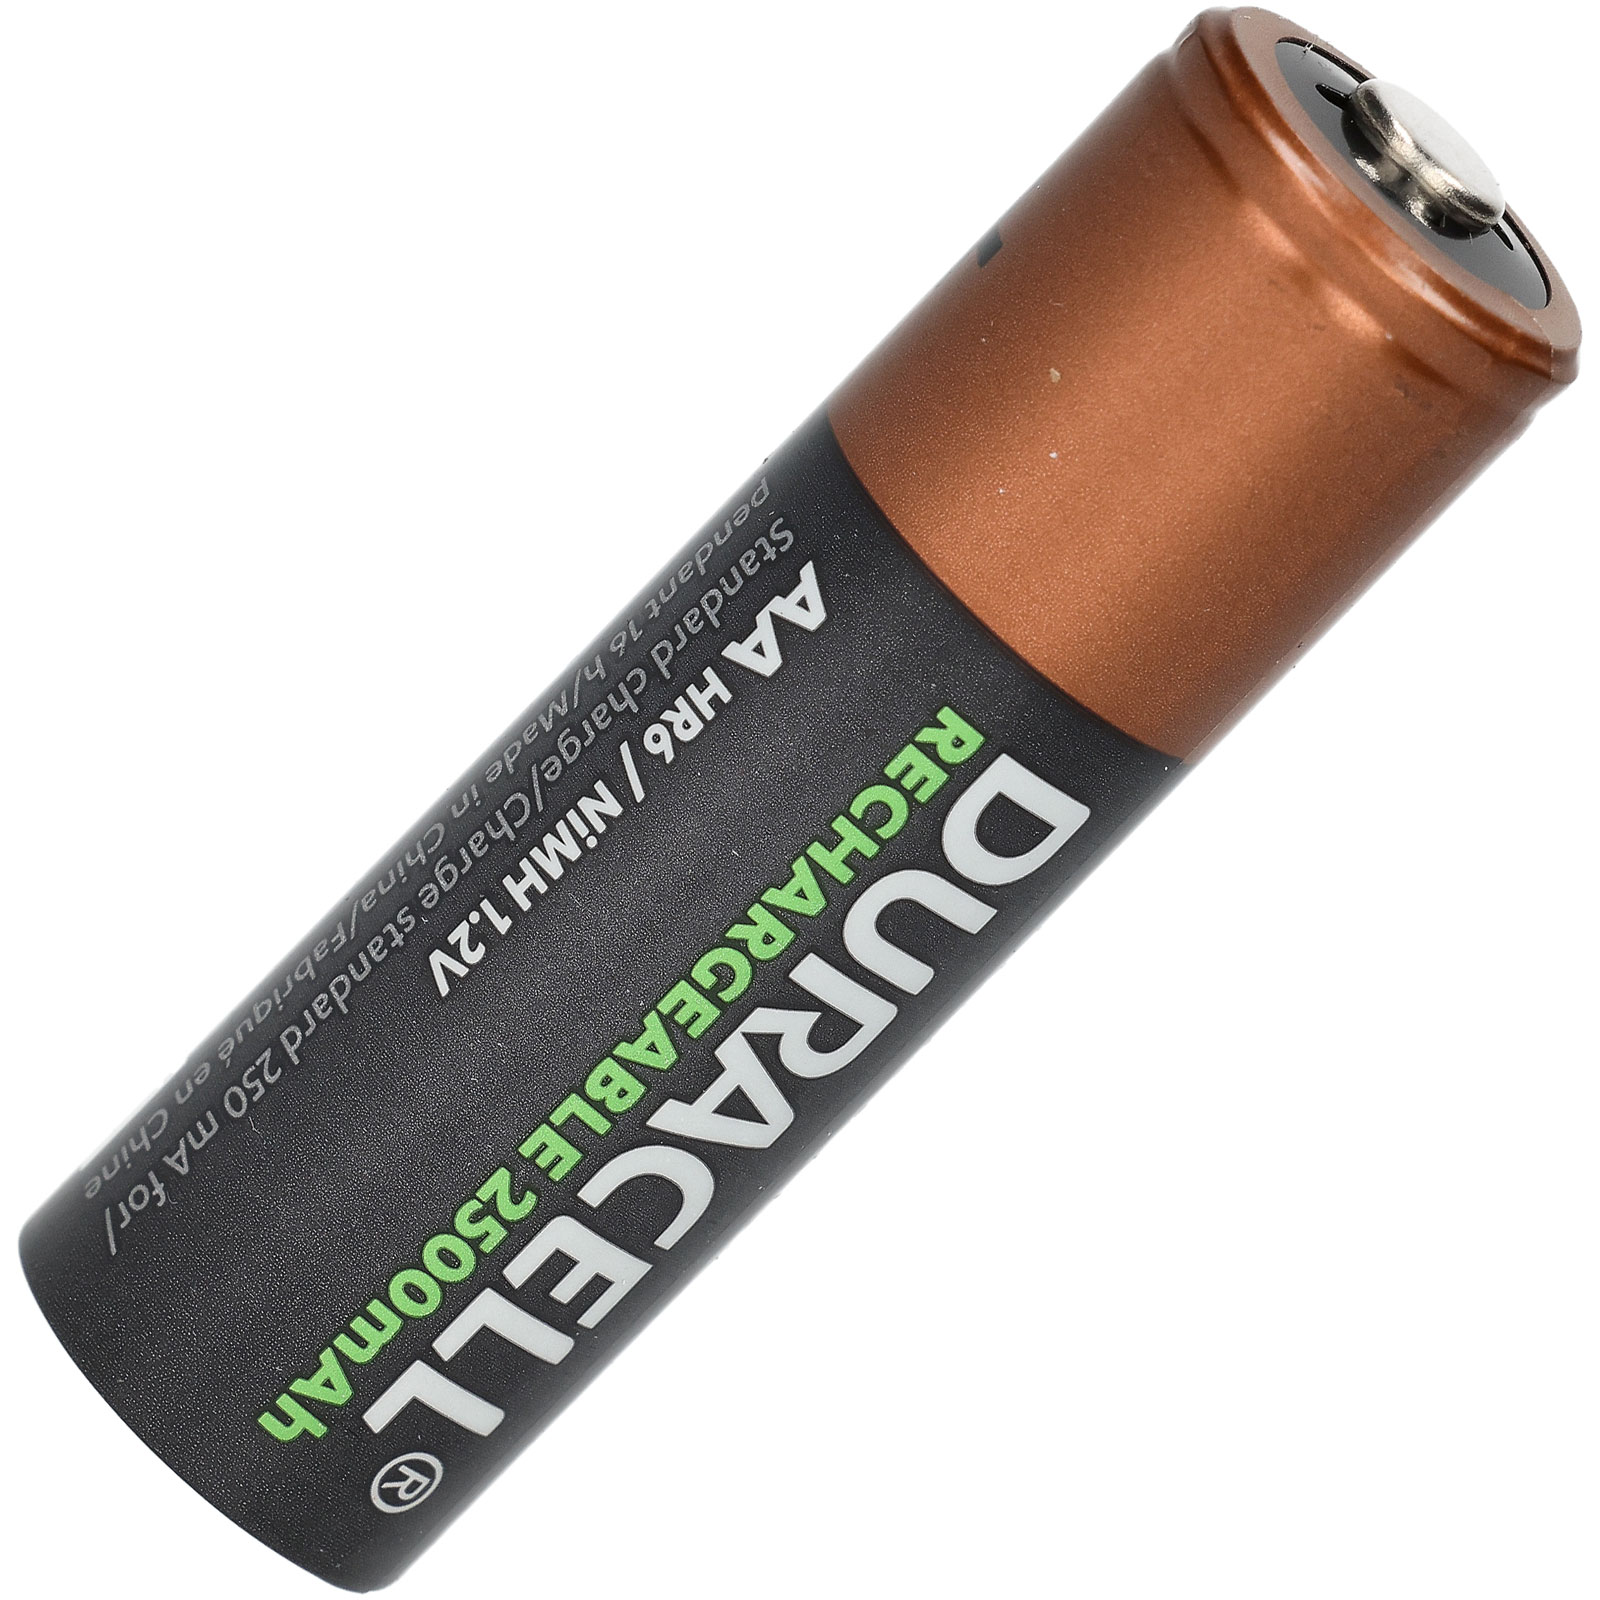 DURACELL NiMH 1.2V AA Rechargeable Battery, 2-pack 